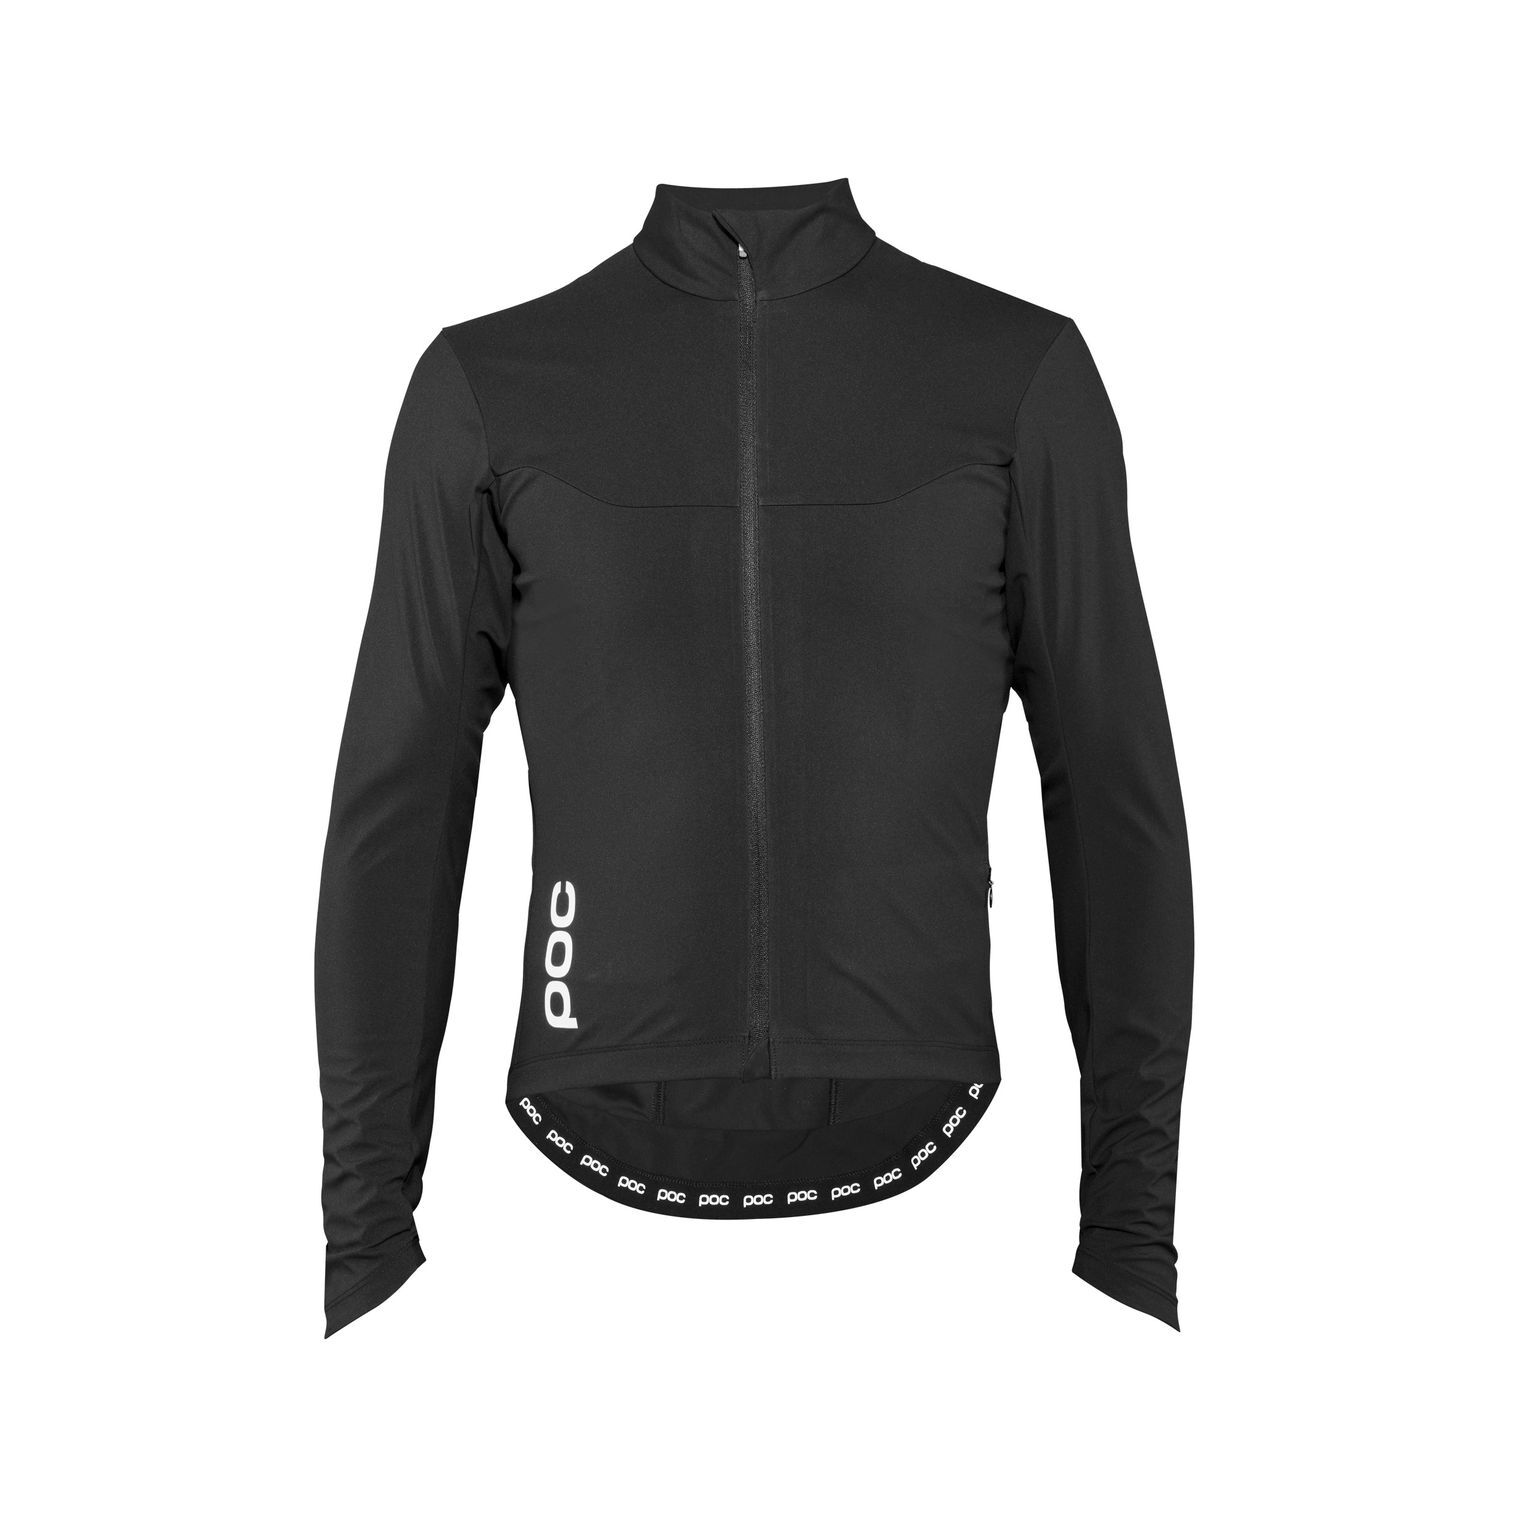 Poc Essential Road Windproof Jersey - Giacca ciclismo - Uomo